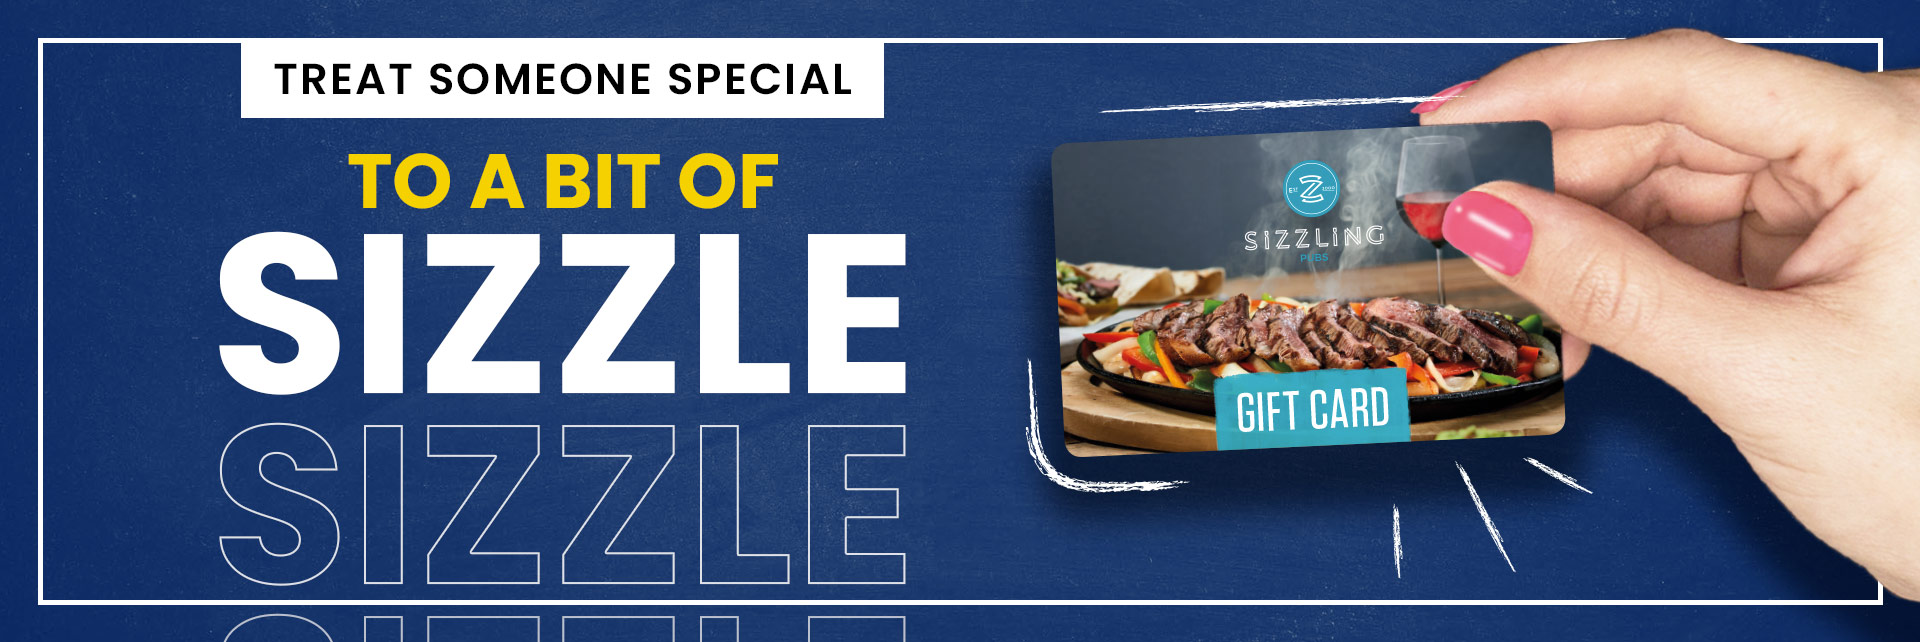 Sizzling Pubs Gift Card at The Norton in Sheffield